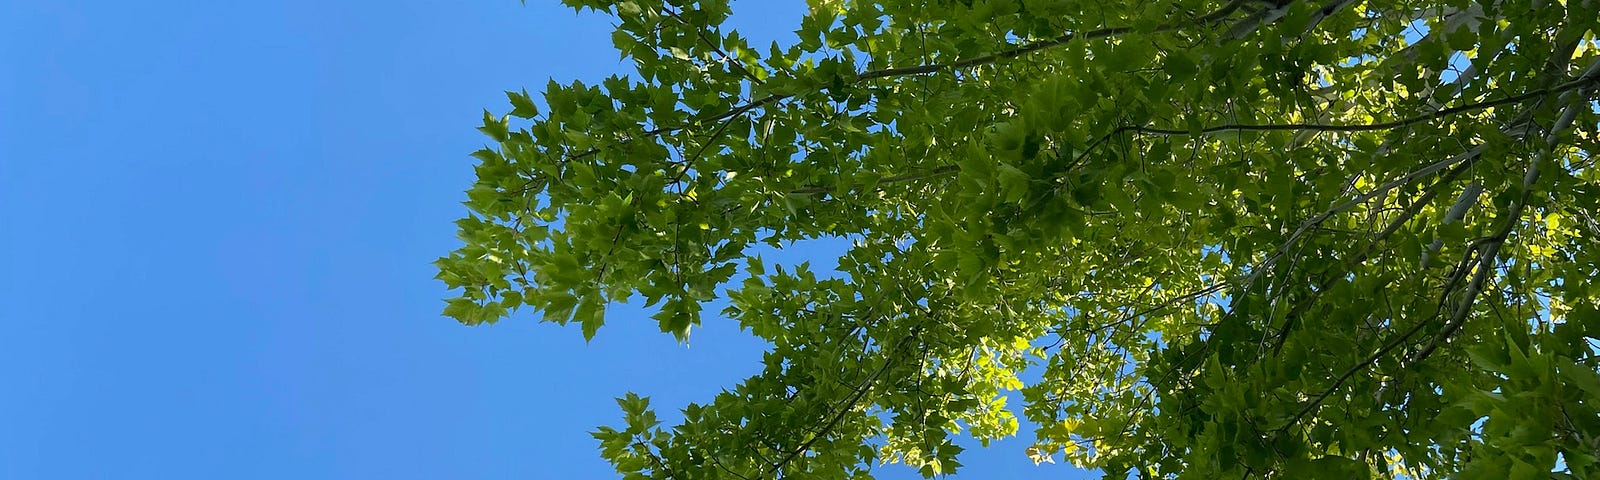 A leafy green tree against a clear blue sky.